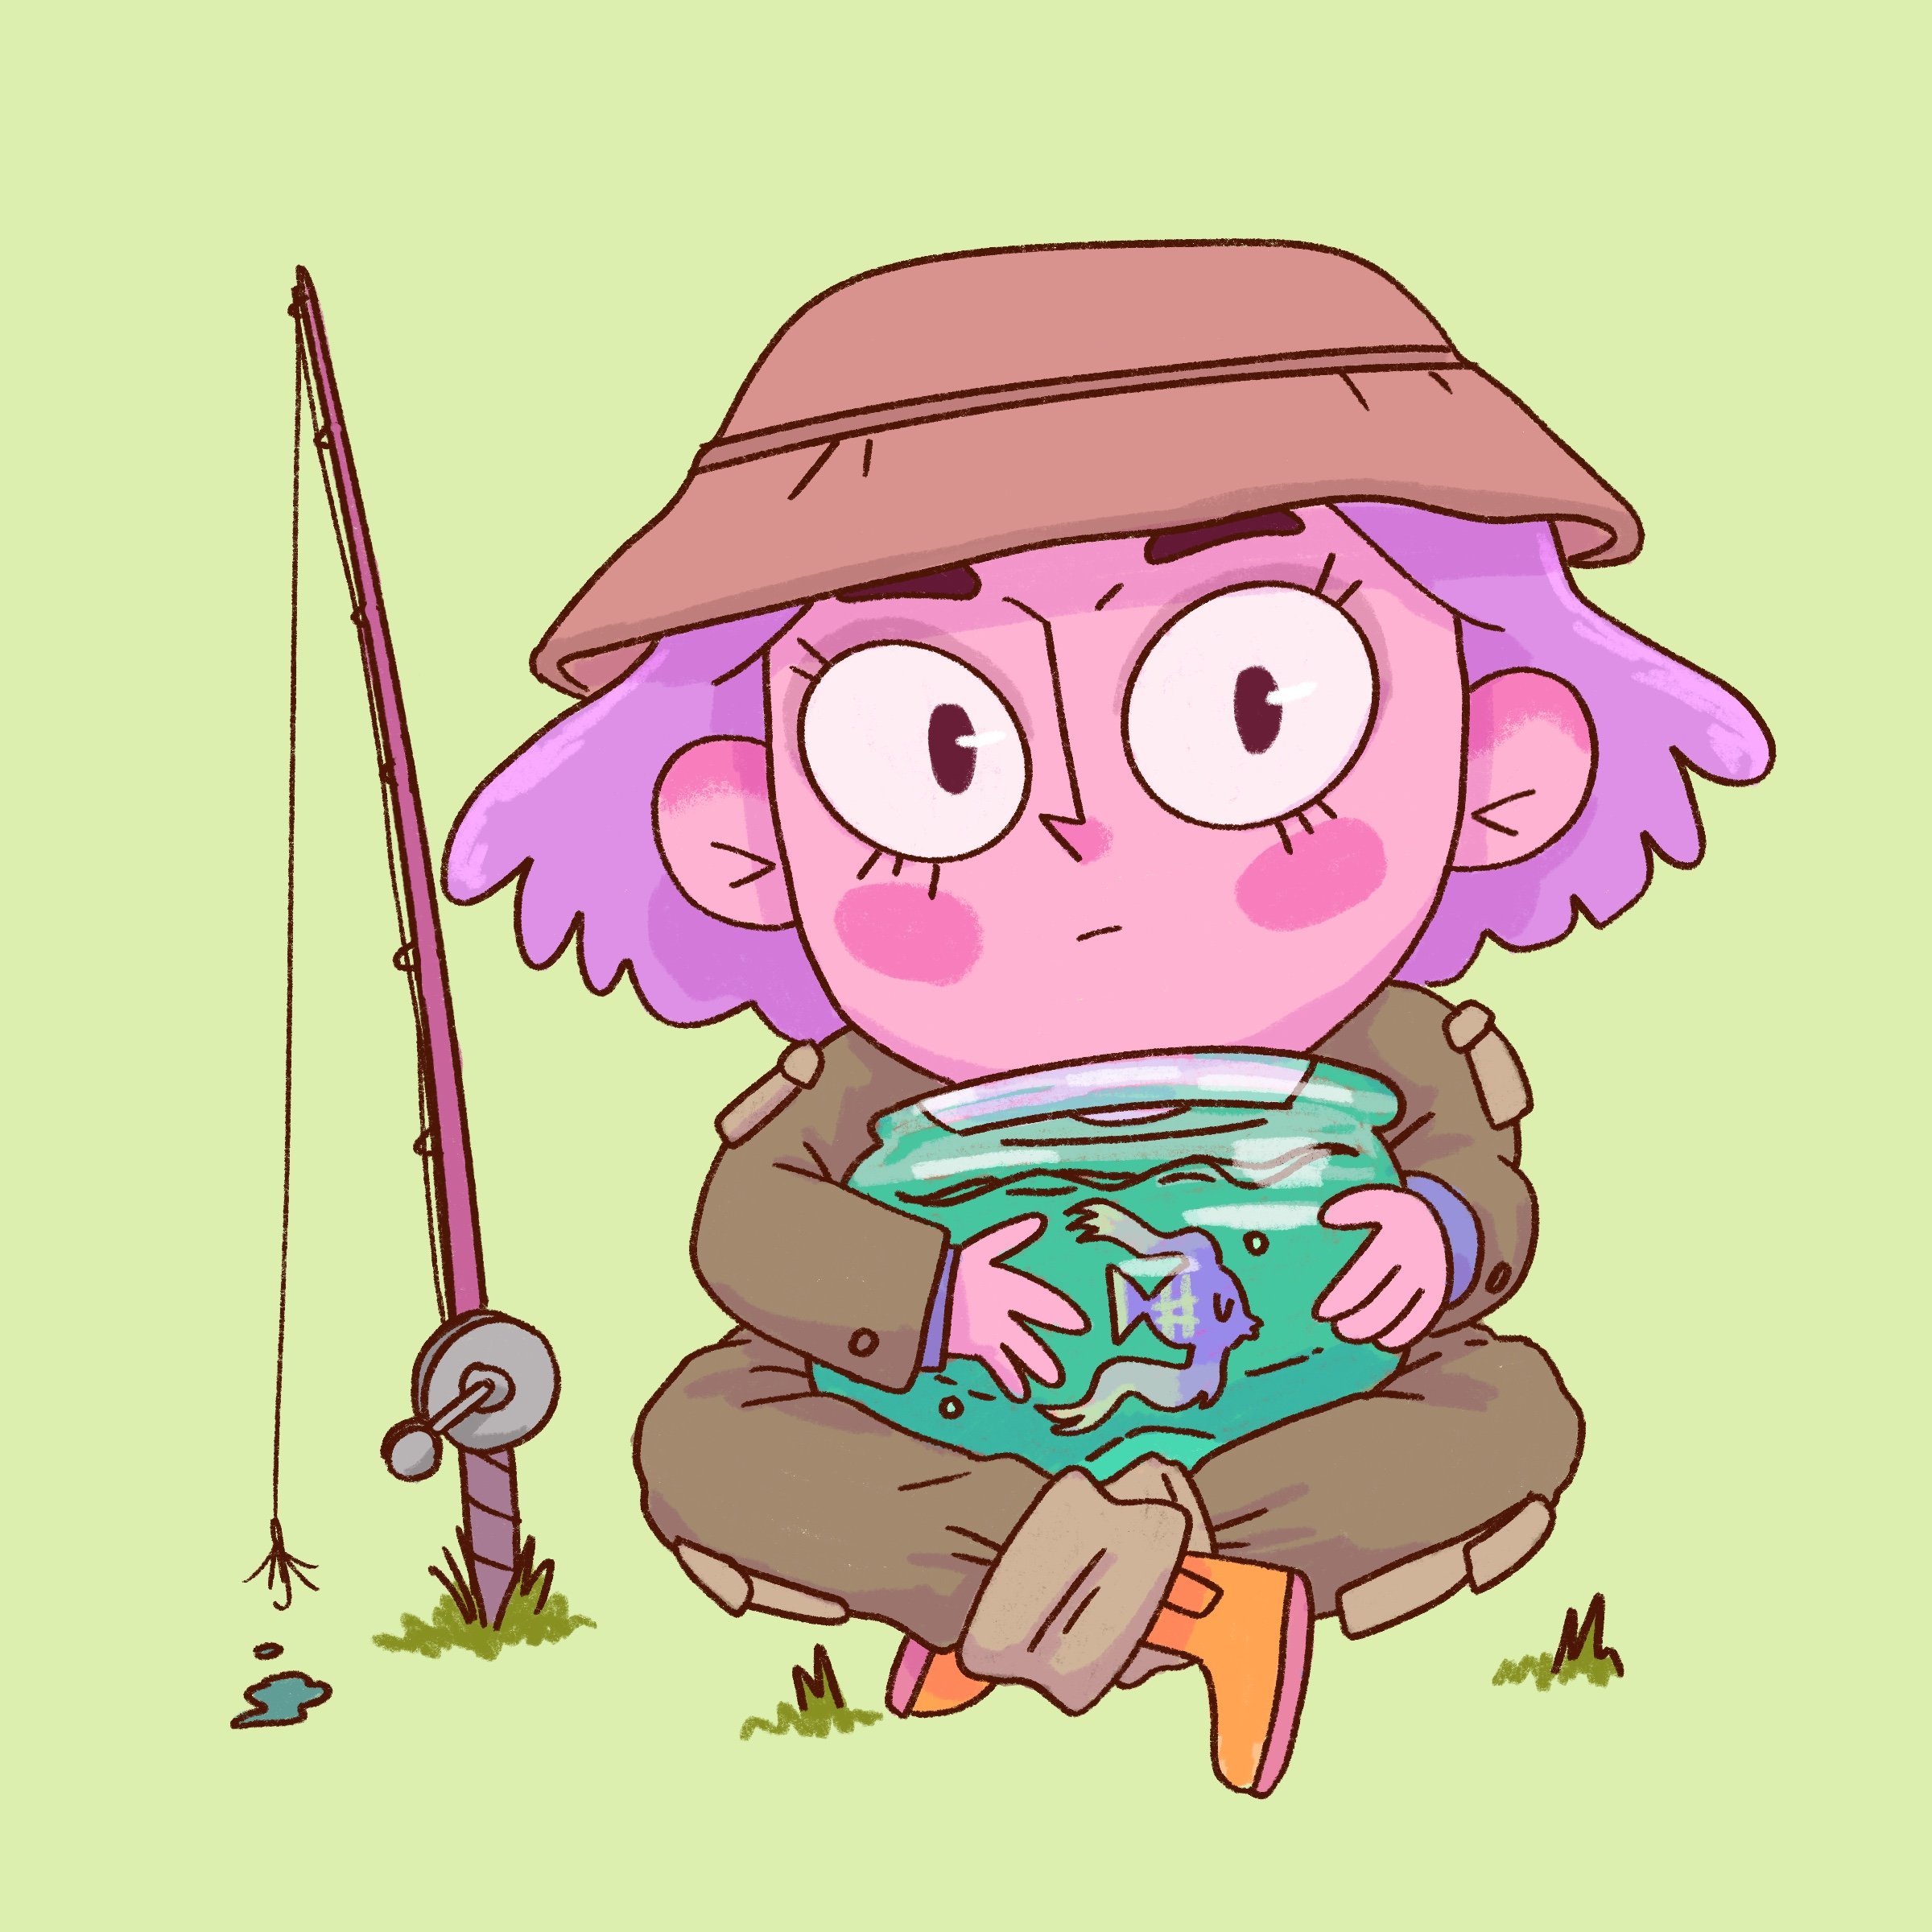 Cute fishing gear character illustration - What motion designers dream of working on - Image